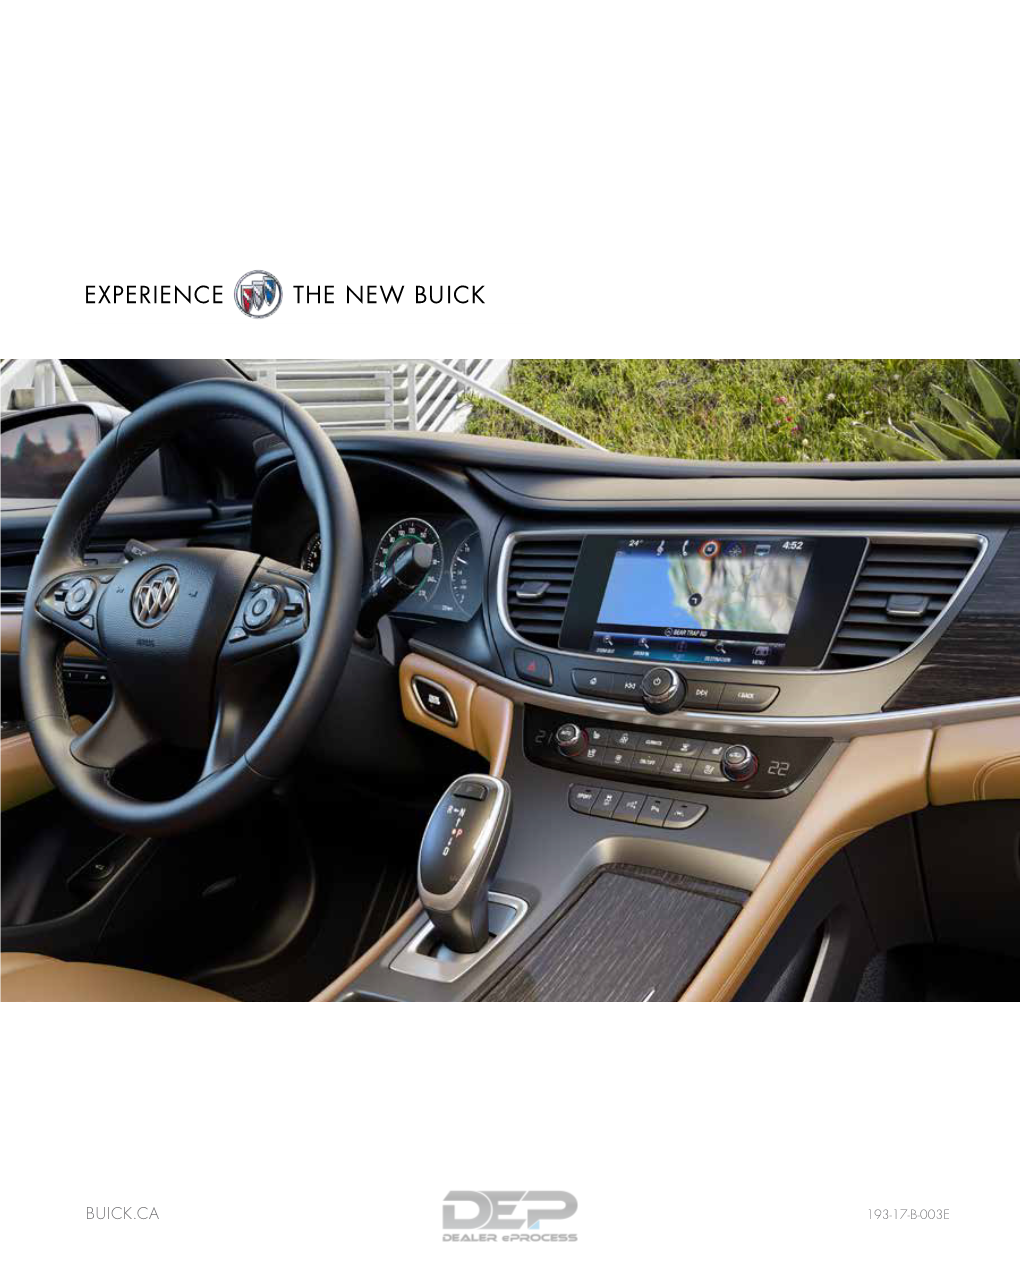 2017 BUICK LACROSSE Elegant Yet Athletic, Modern Yet Timeless, This Is the New Face of Buick